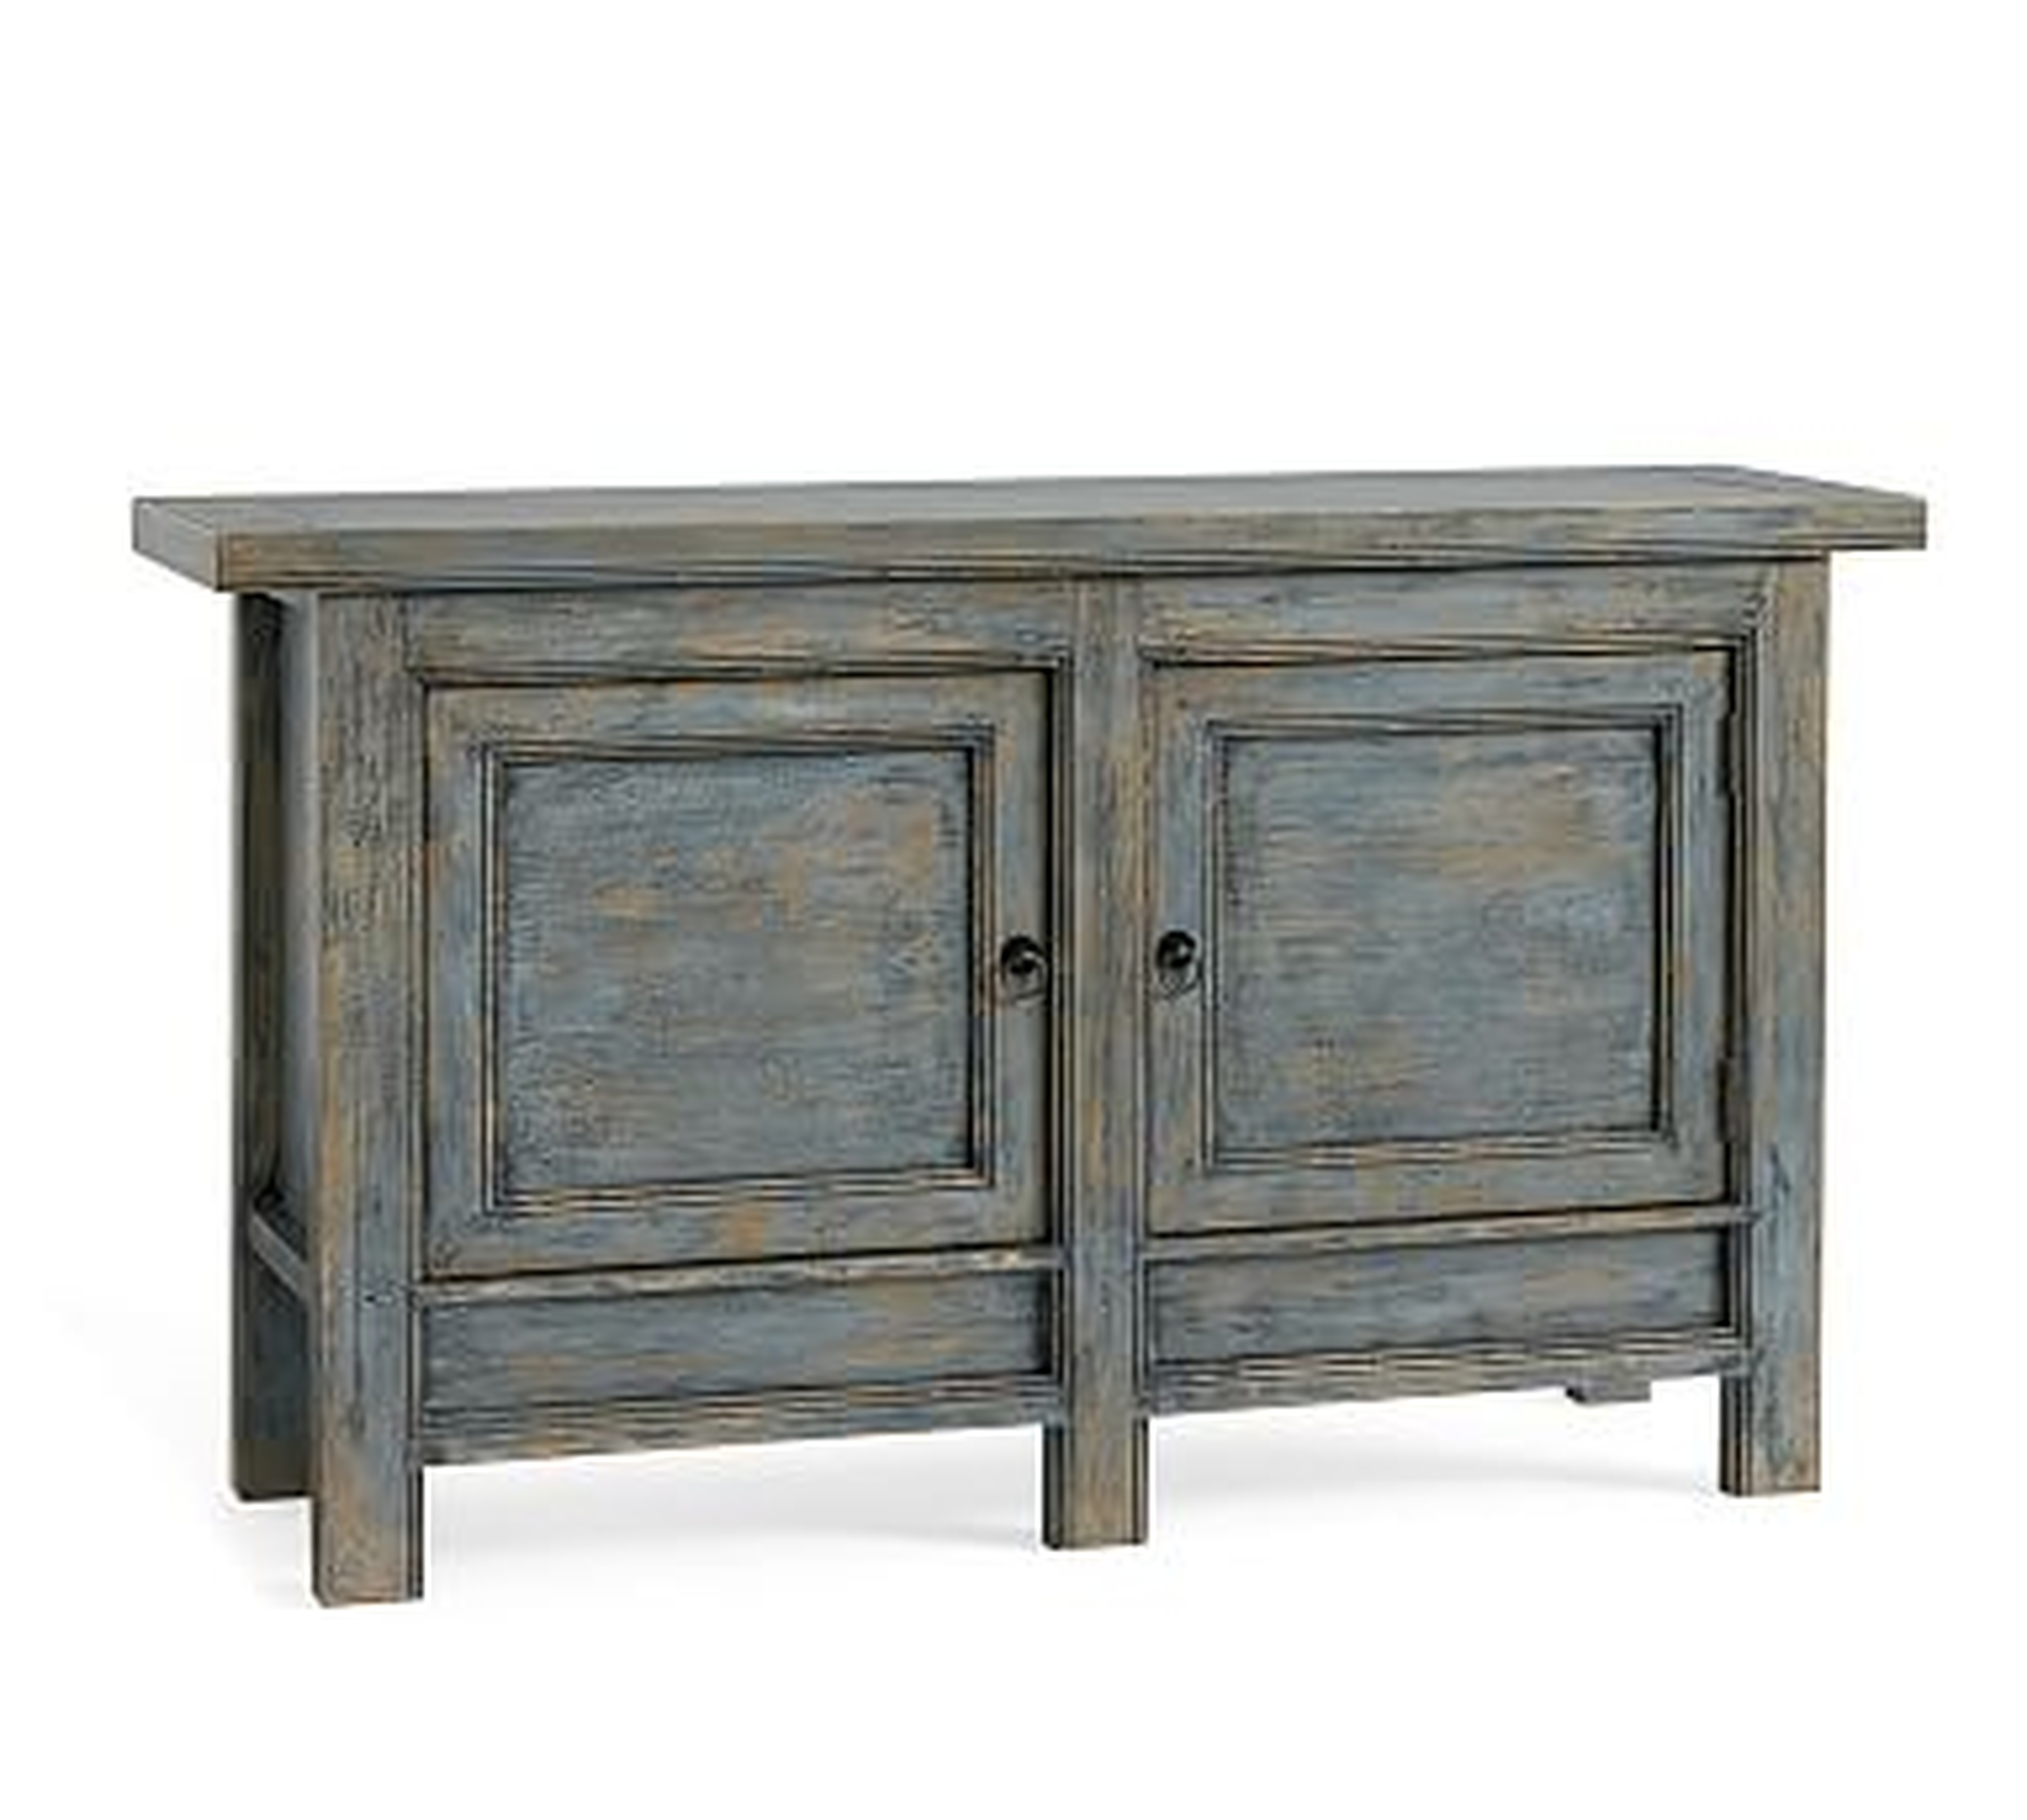 Molucca 62" Media Console, Distressed Blue - Pottery Barn